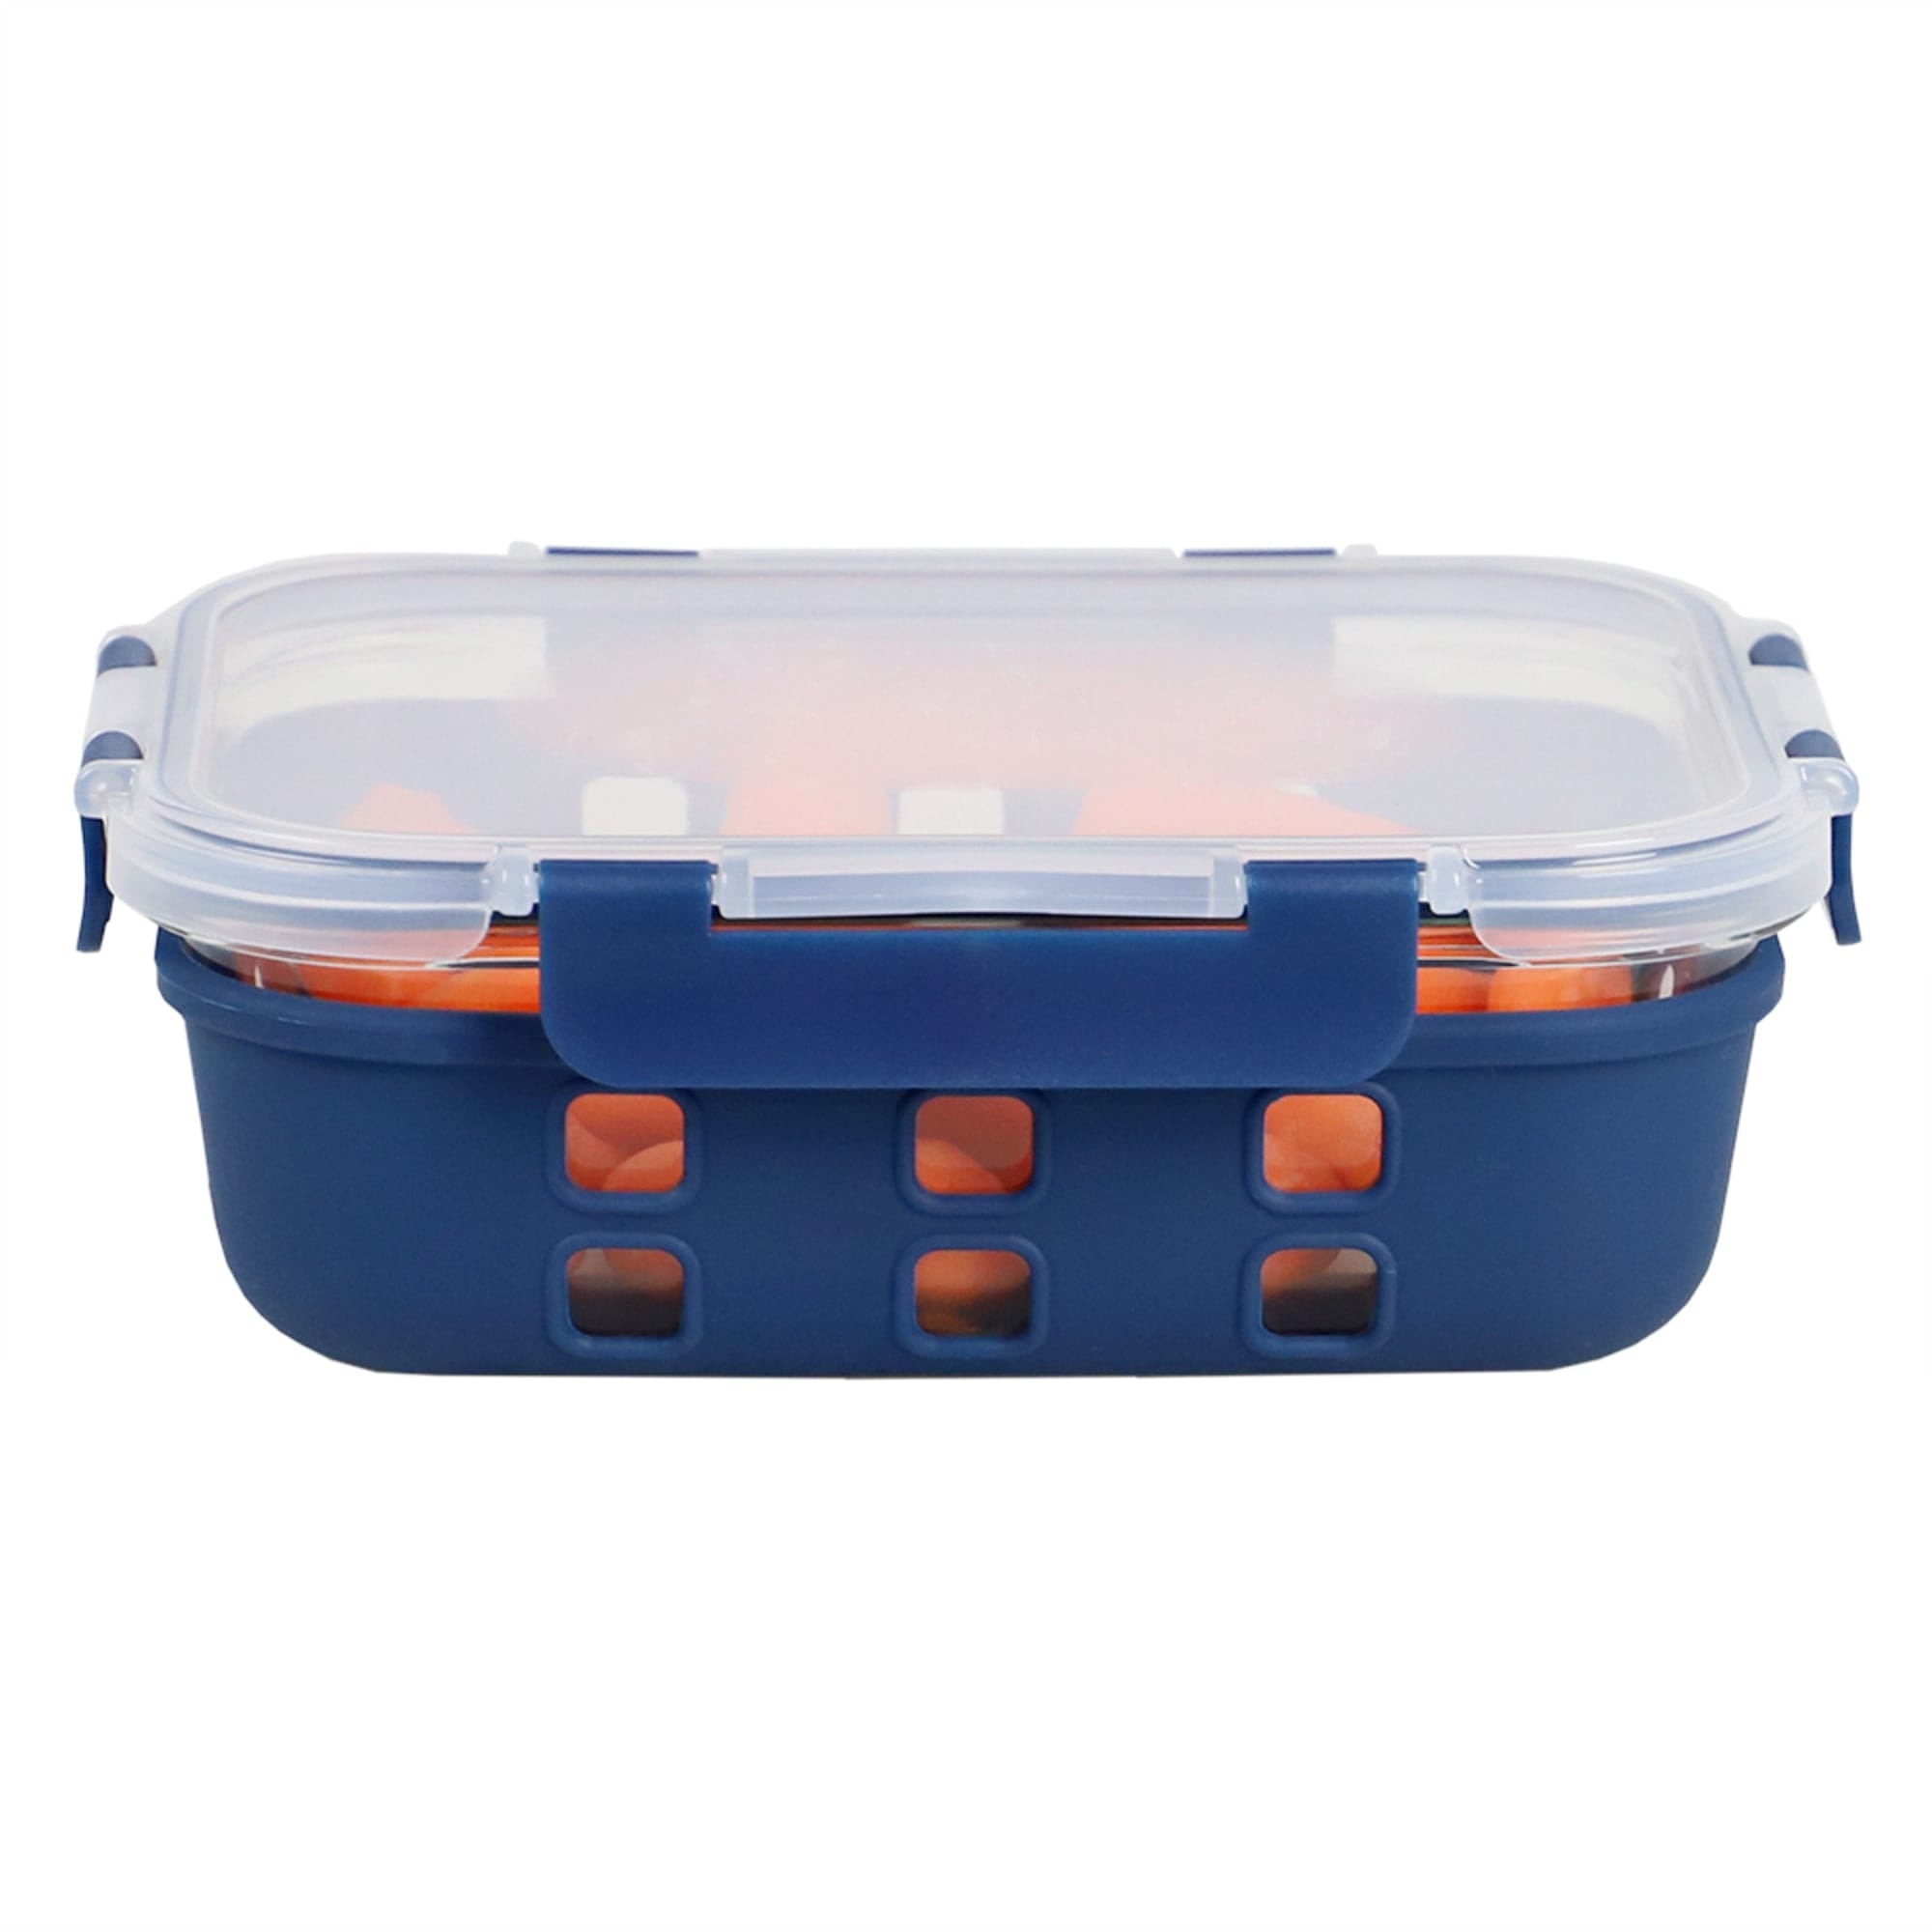 Michael Graves Design Rectangle Large 35 Ounce High Borosilicate Glass Food Storage Container with Plastic Lid, Indigo $8.00 EACH, CASE PACK OF 12